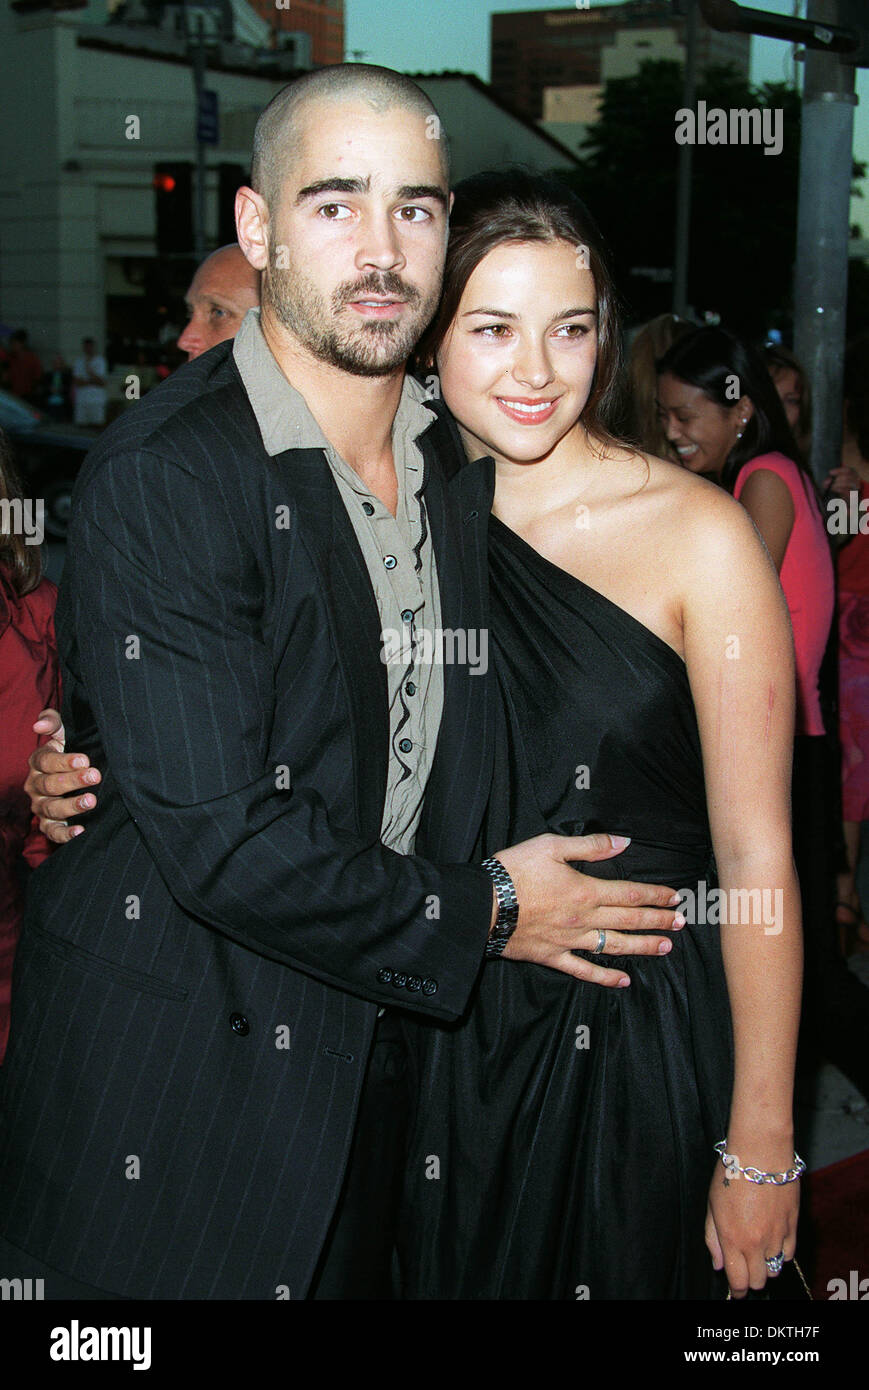 COLIN FARRELL & AMELIA WARNER.ACTOR & ACTRESS.HOLLYWOOD, LOS ANGELES,  USA.14/08/2001.BL67G2C Stock Photo - Alamy